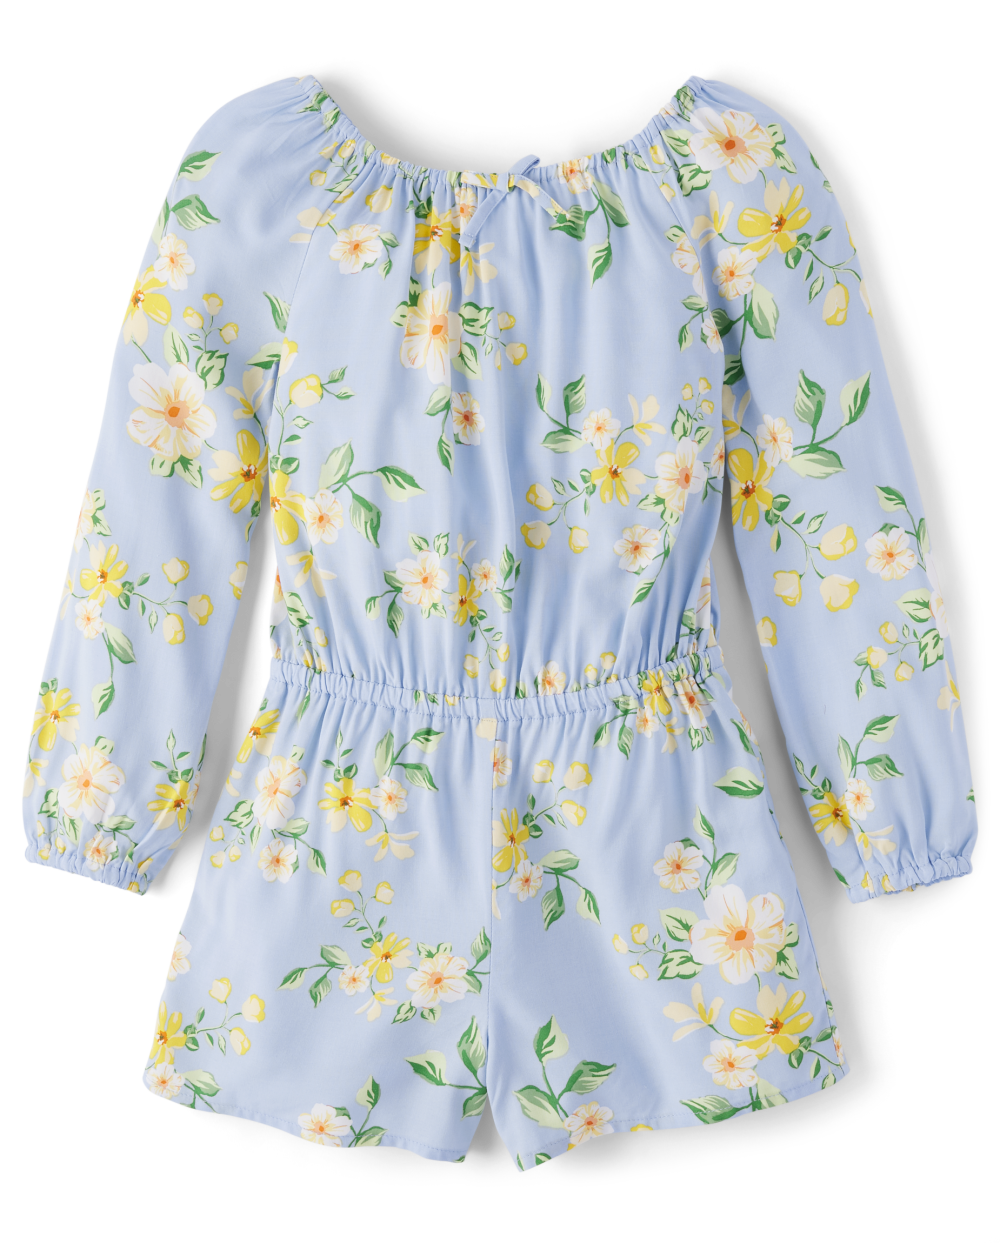 Girls Rayon Long Sleeves Floral Print Round Neck Romper With a Bow(s)